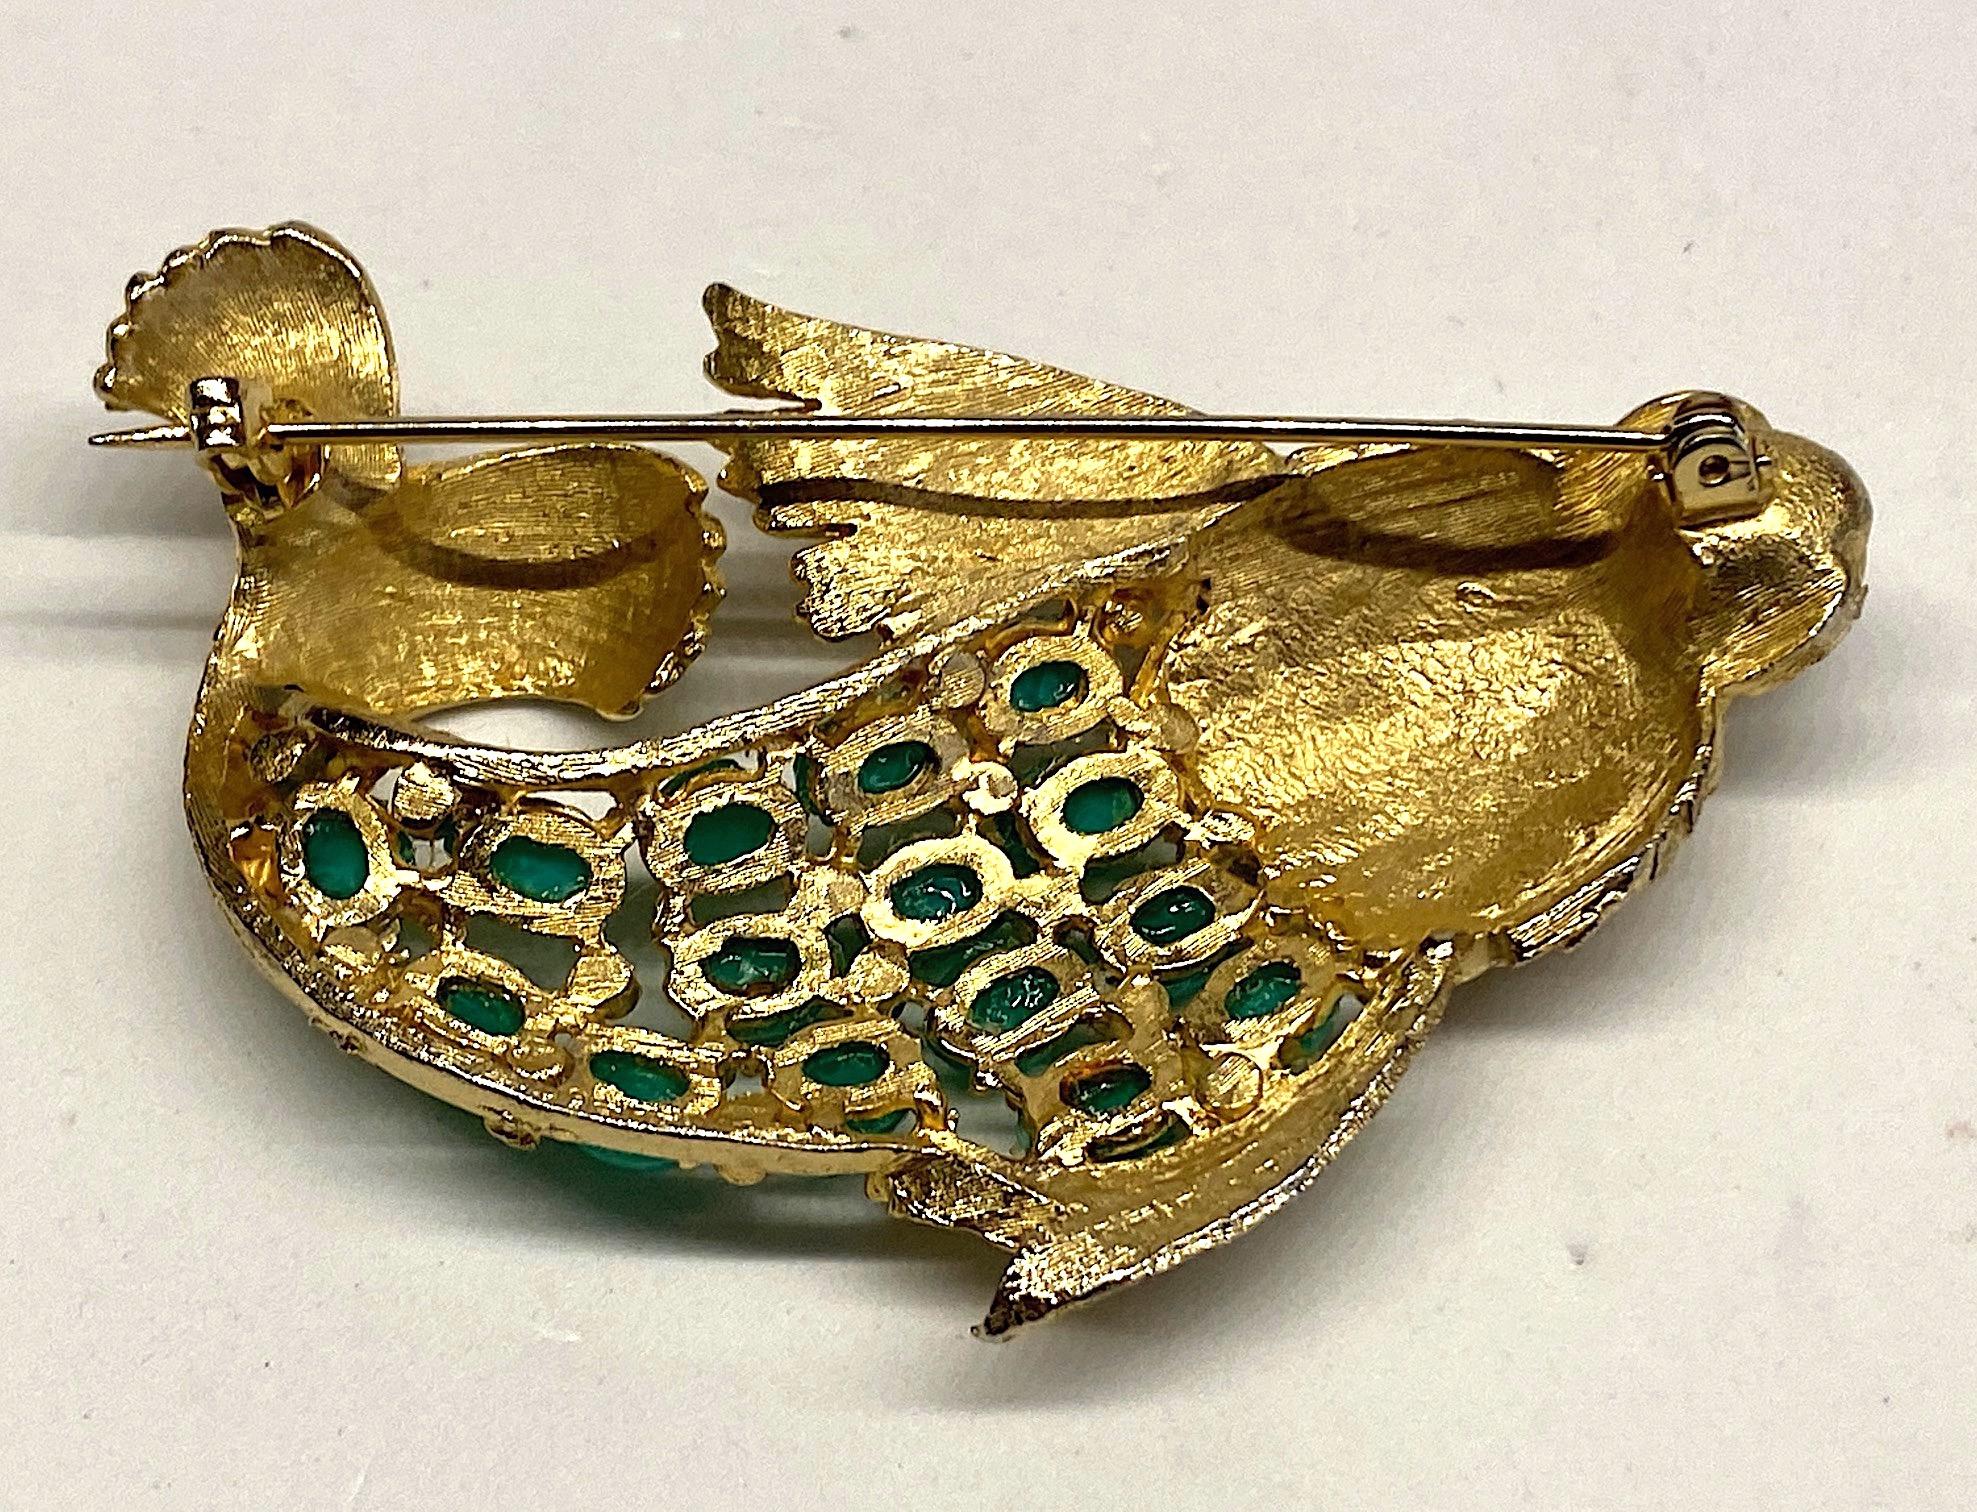 1950s Satin Gold Figural Brooch of Fish with Green Cabochon 6